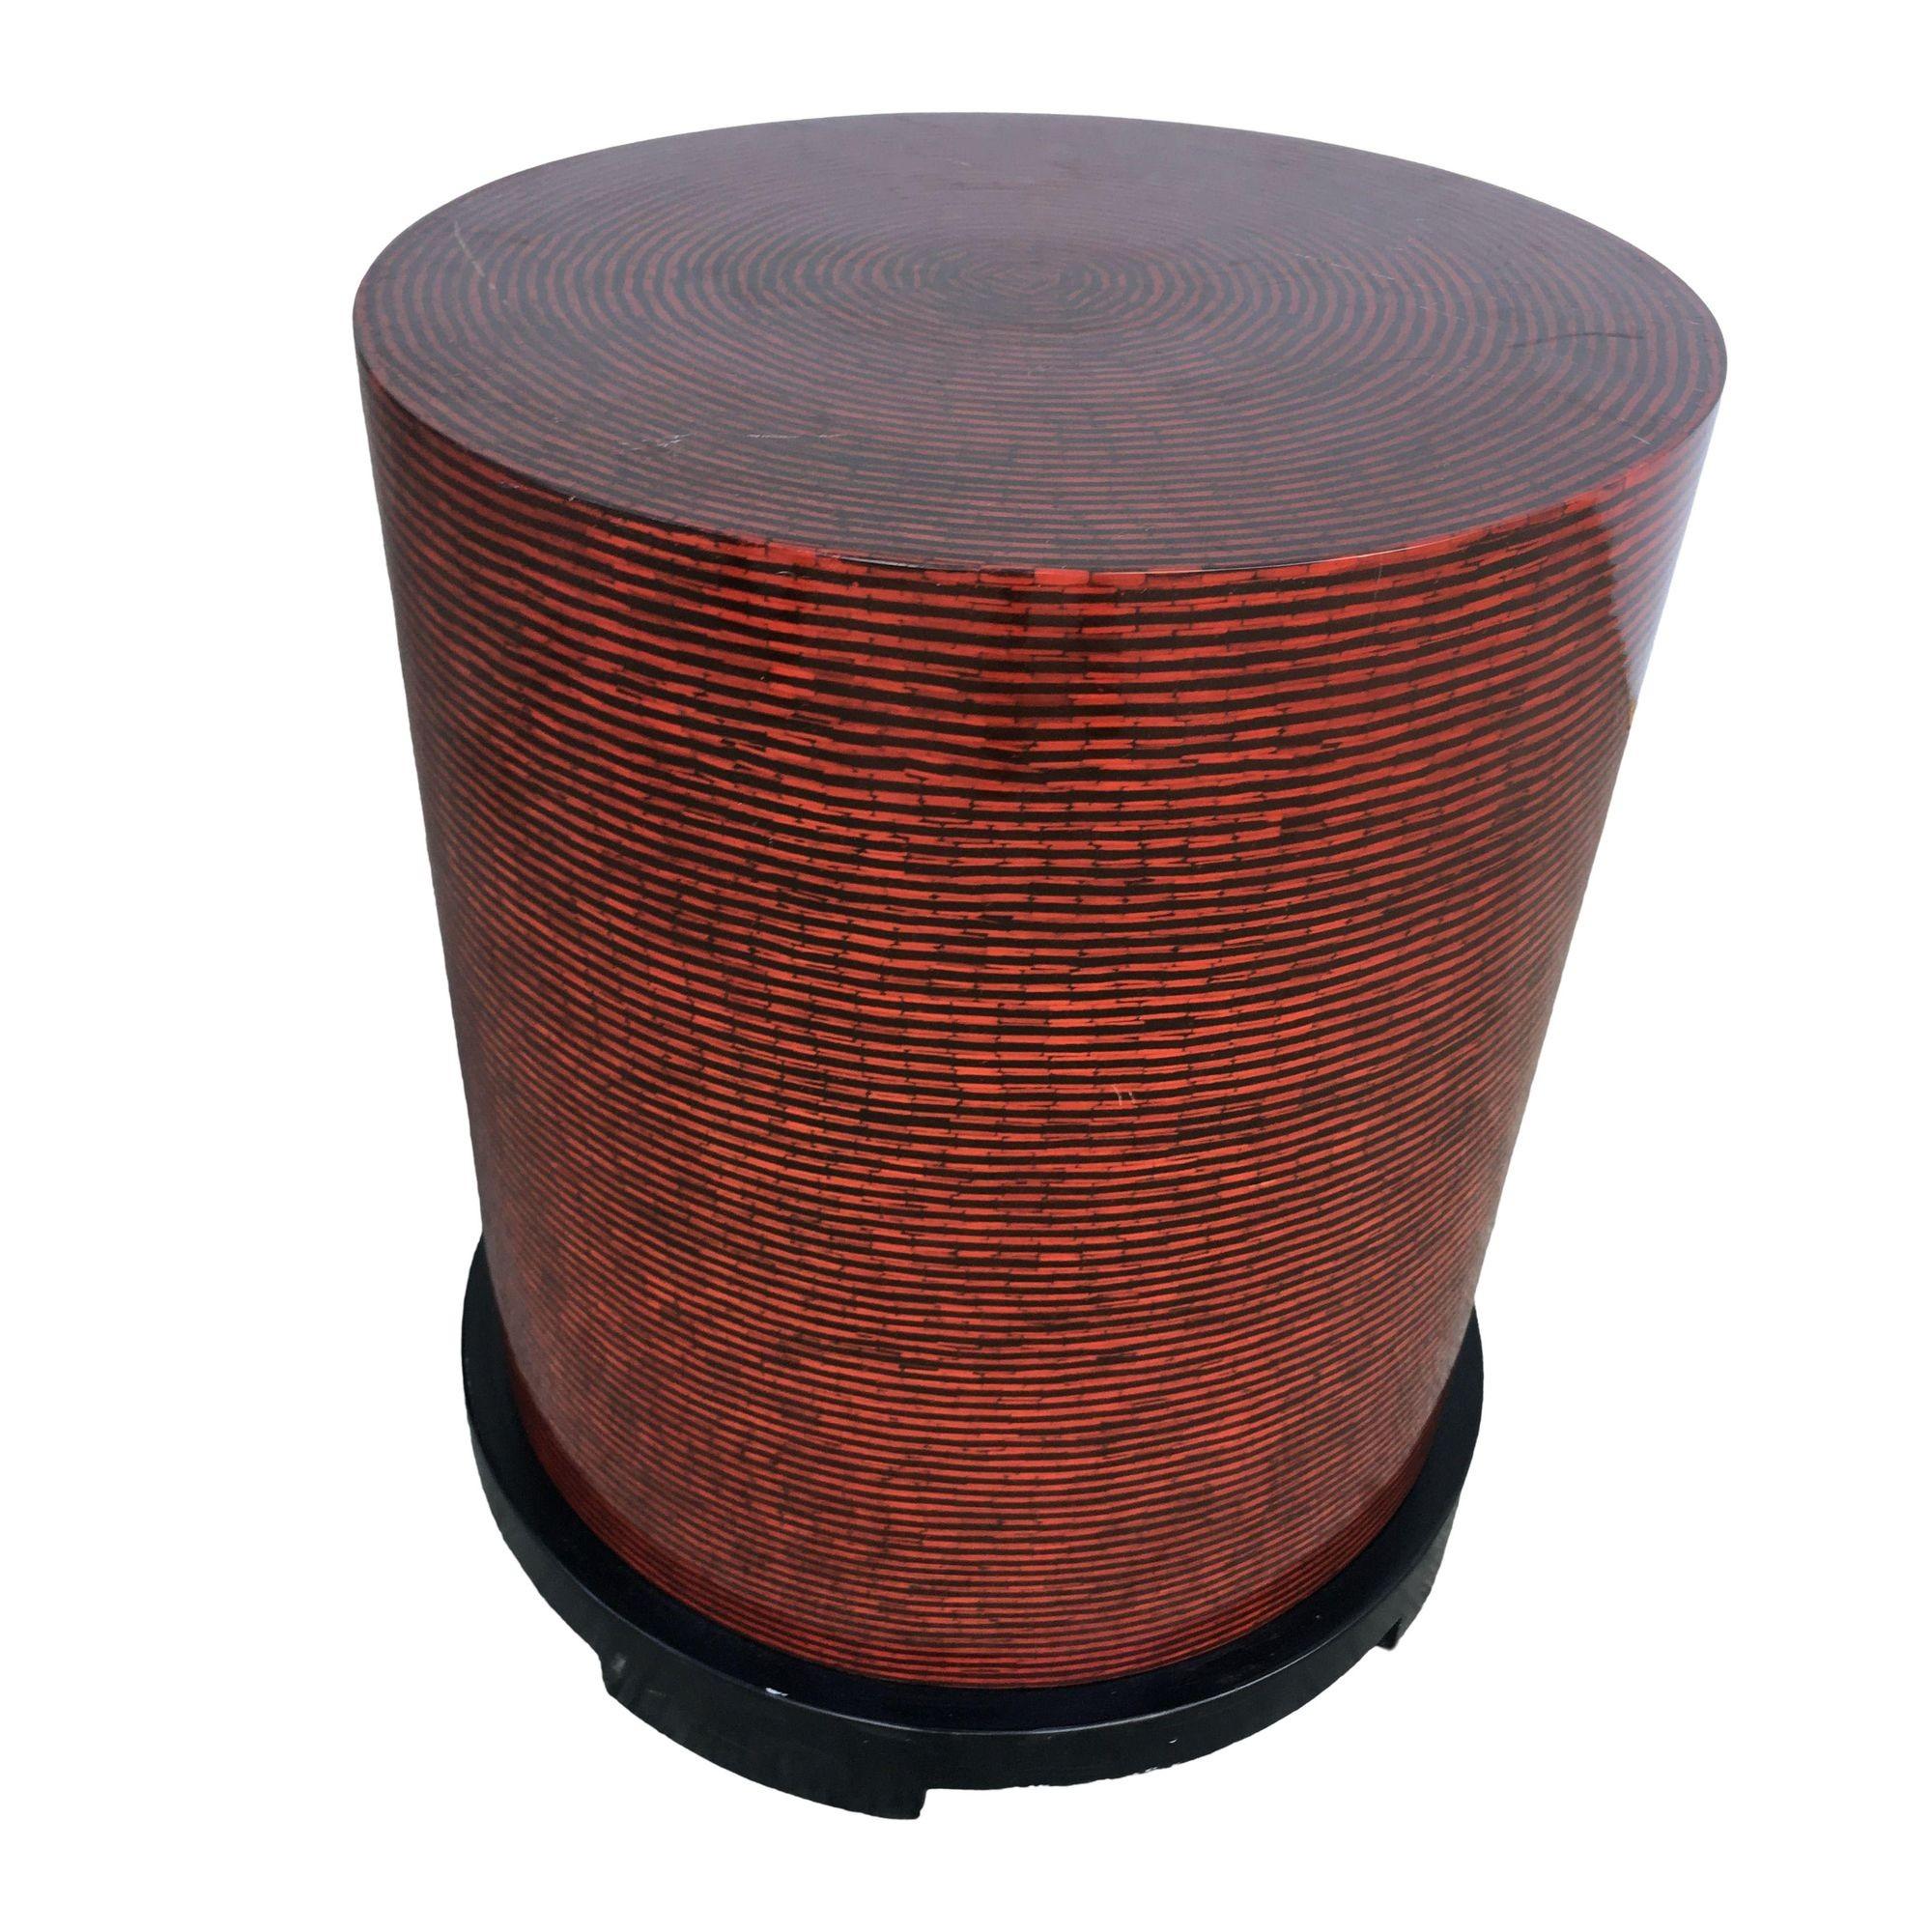 Pair of Two-tone Cubist Style round side table with red and tan textured vinyl tops.